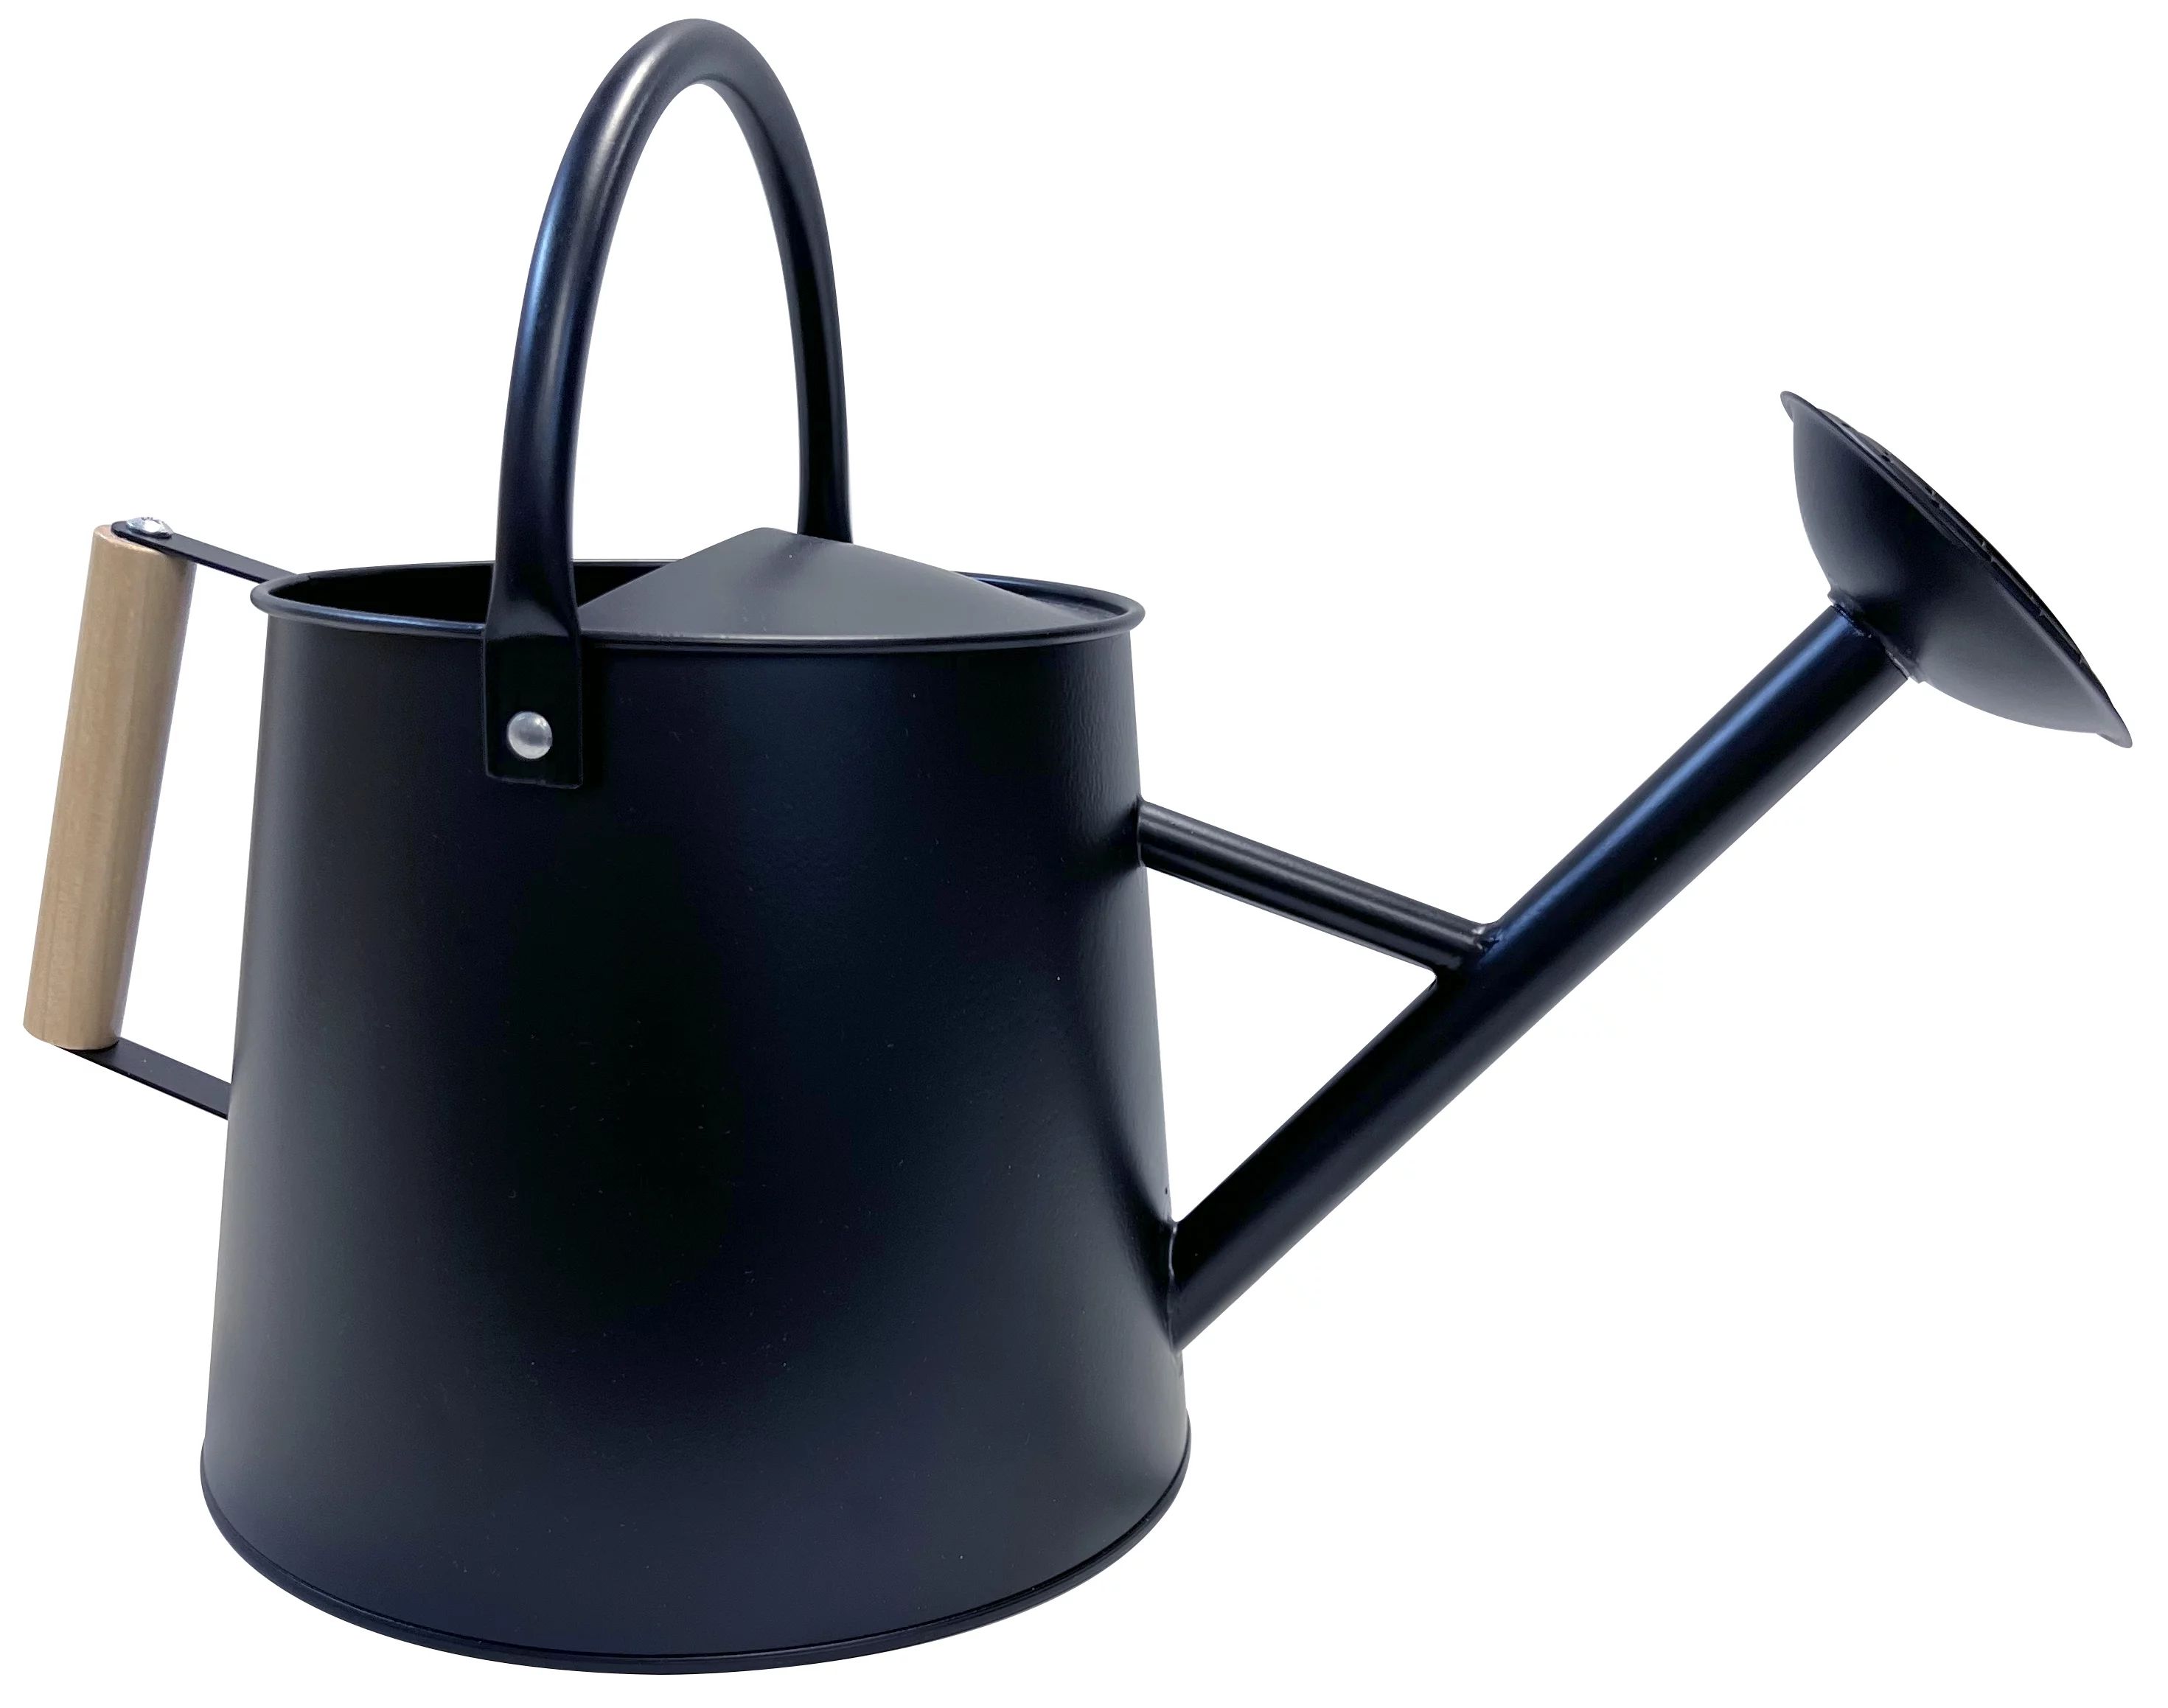 Better Homes & Gardens 1.5 Gallon Black Metal Watering Can with Wood Handle | Walmart (US)